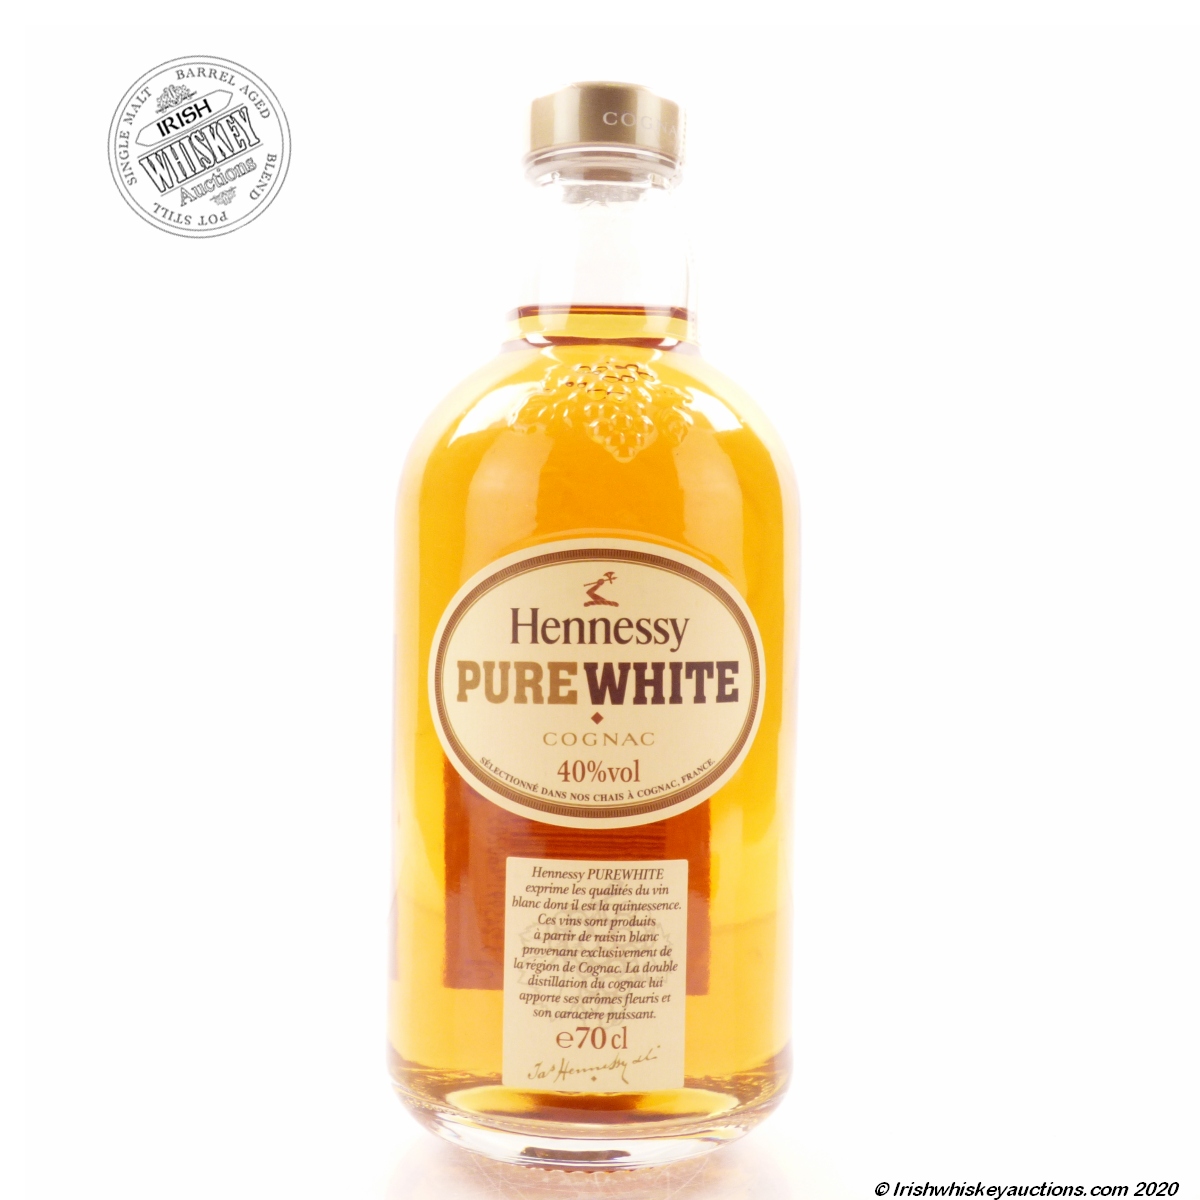 Buy Hennessy Pure White Cognac